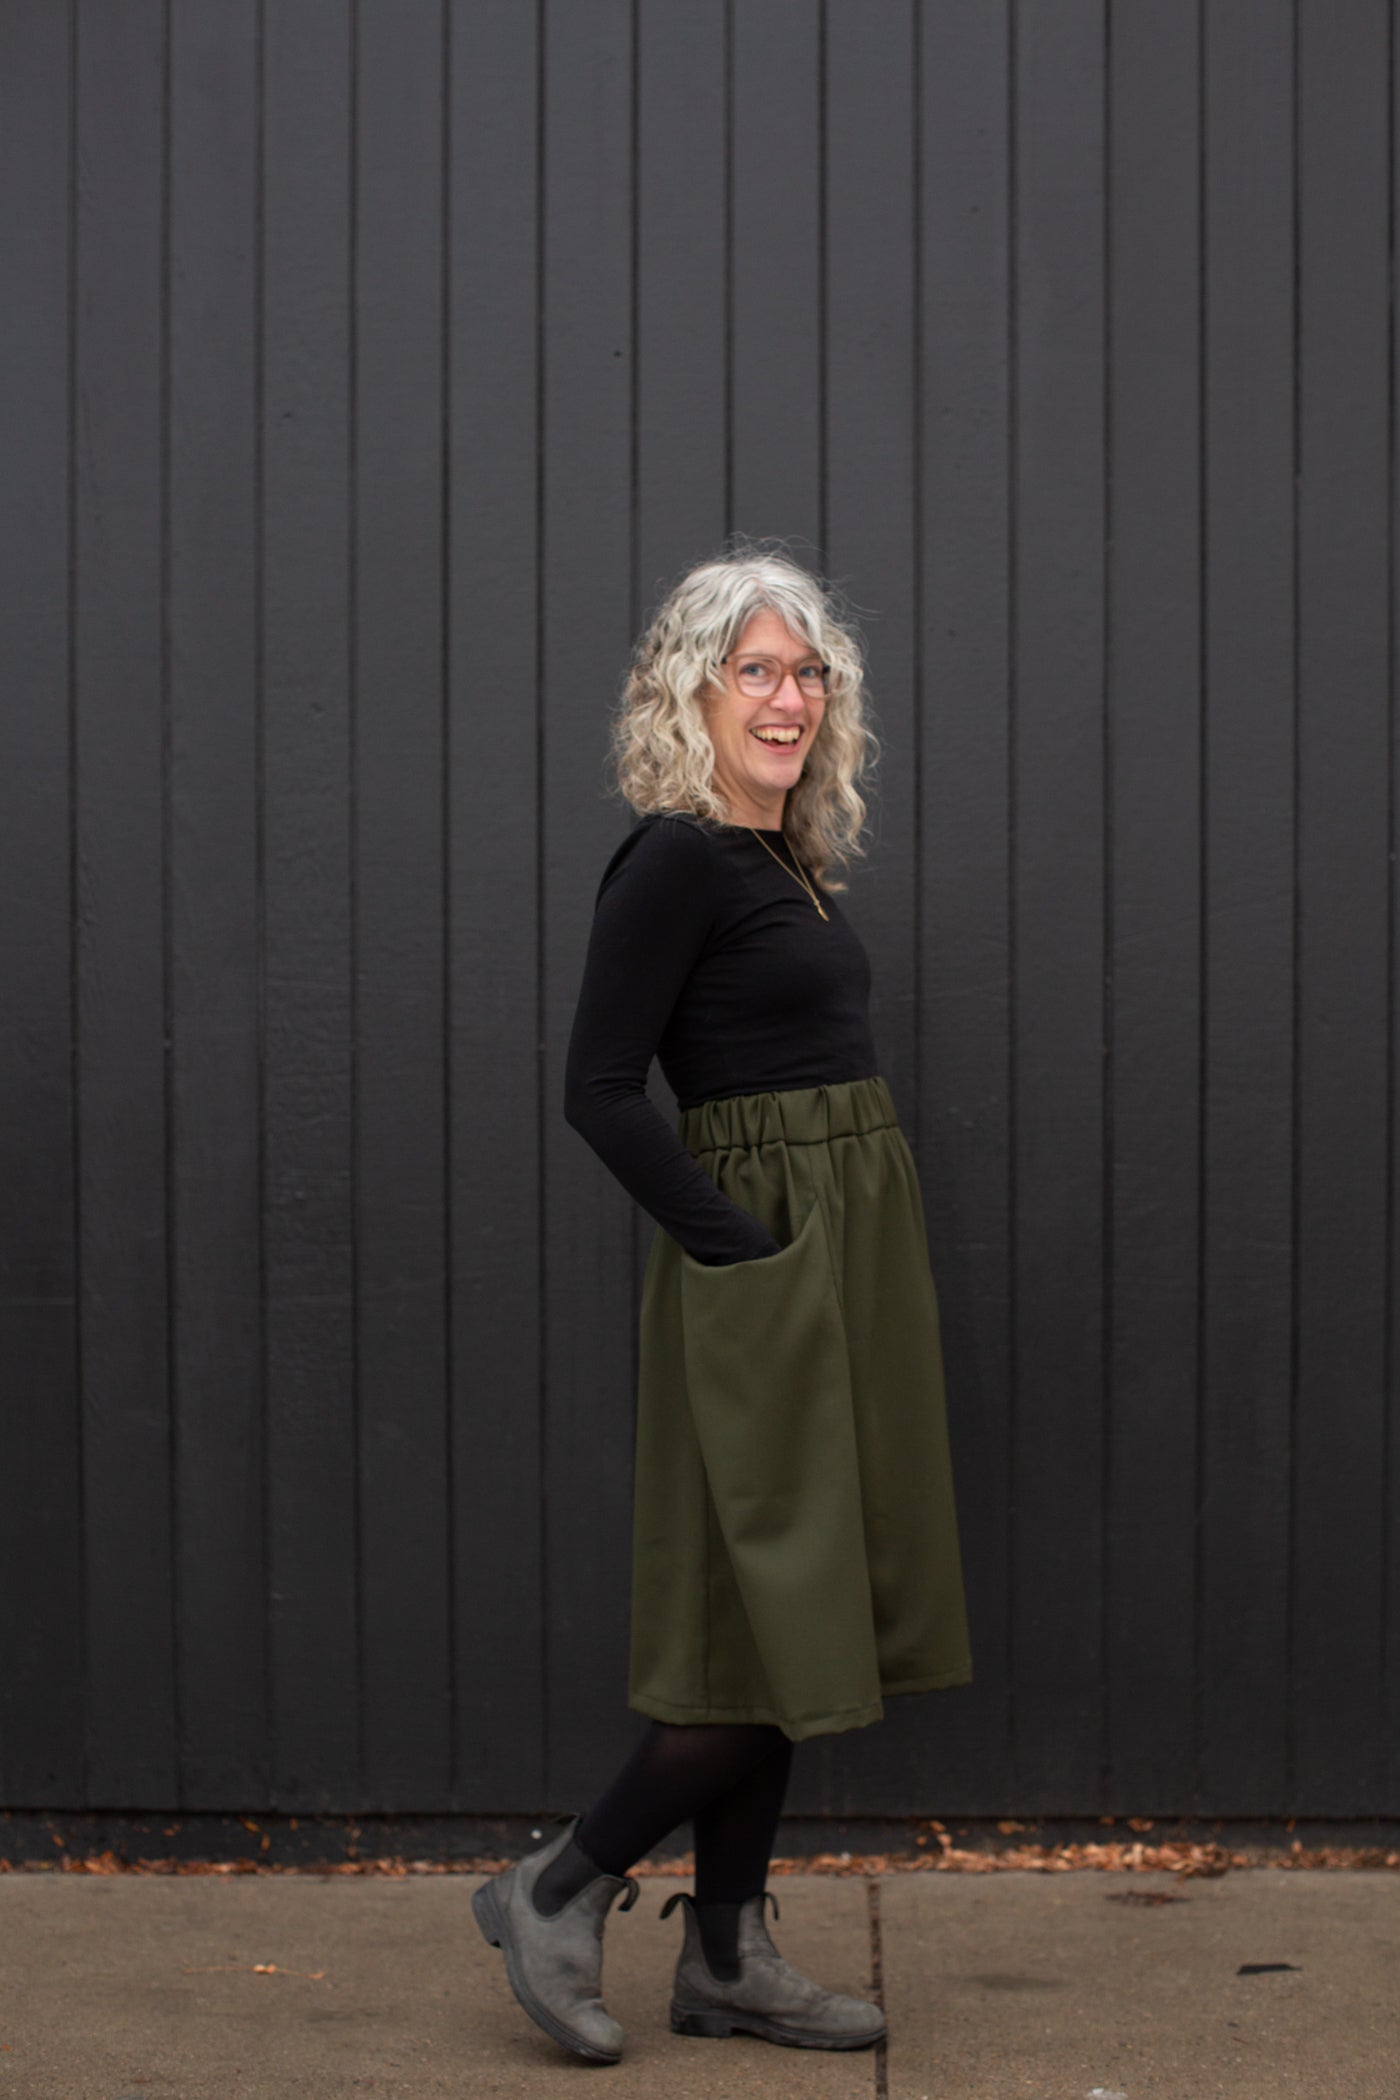 Jaime standing against a black wall in a black long sleeve and olive colored skirt with her hands in her pockets looking at the camera smiling.